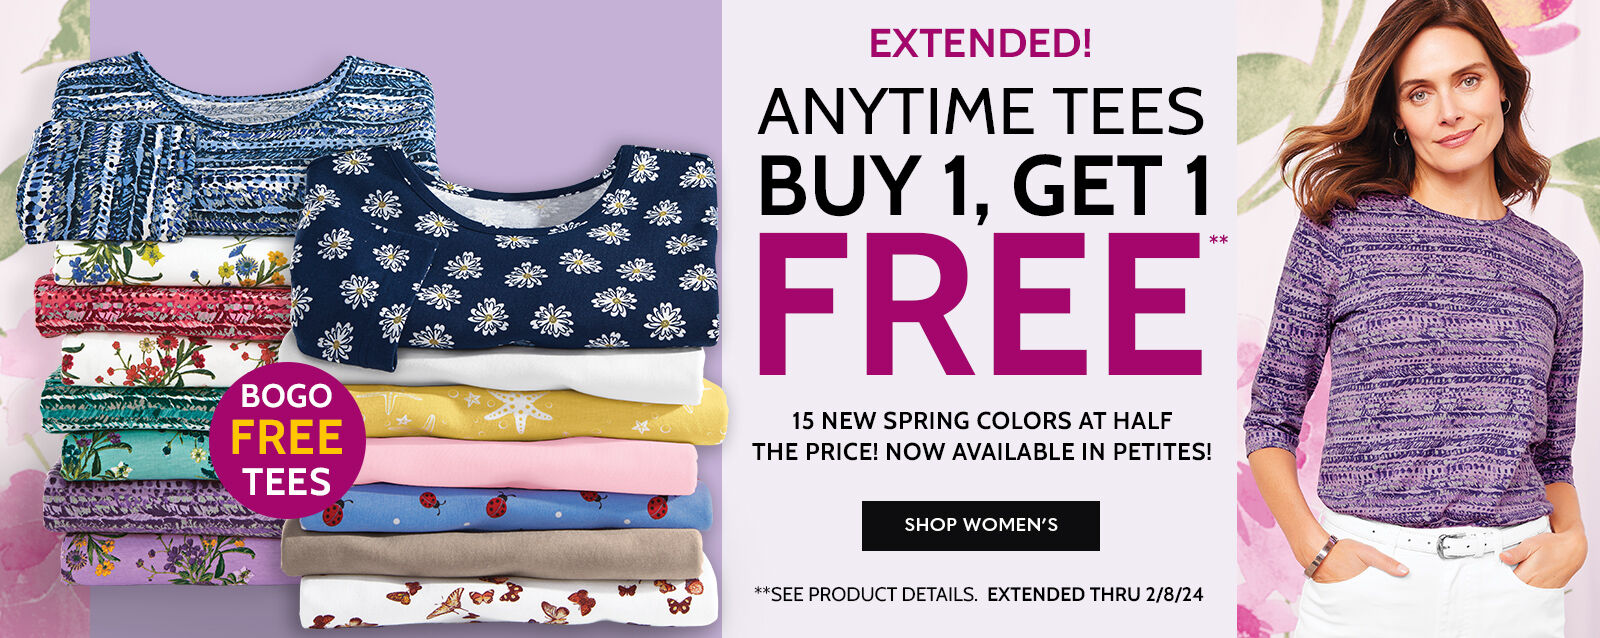 extended! anytime tees buy 1, get 1 free** 15 new spring colors at half the price! now available in petites! BOGO Free Tees shop now **See product details ends thursday 2/8/24